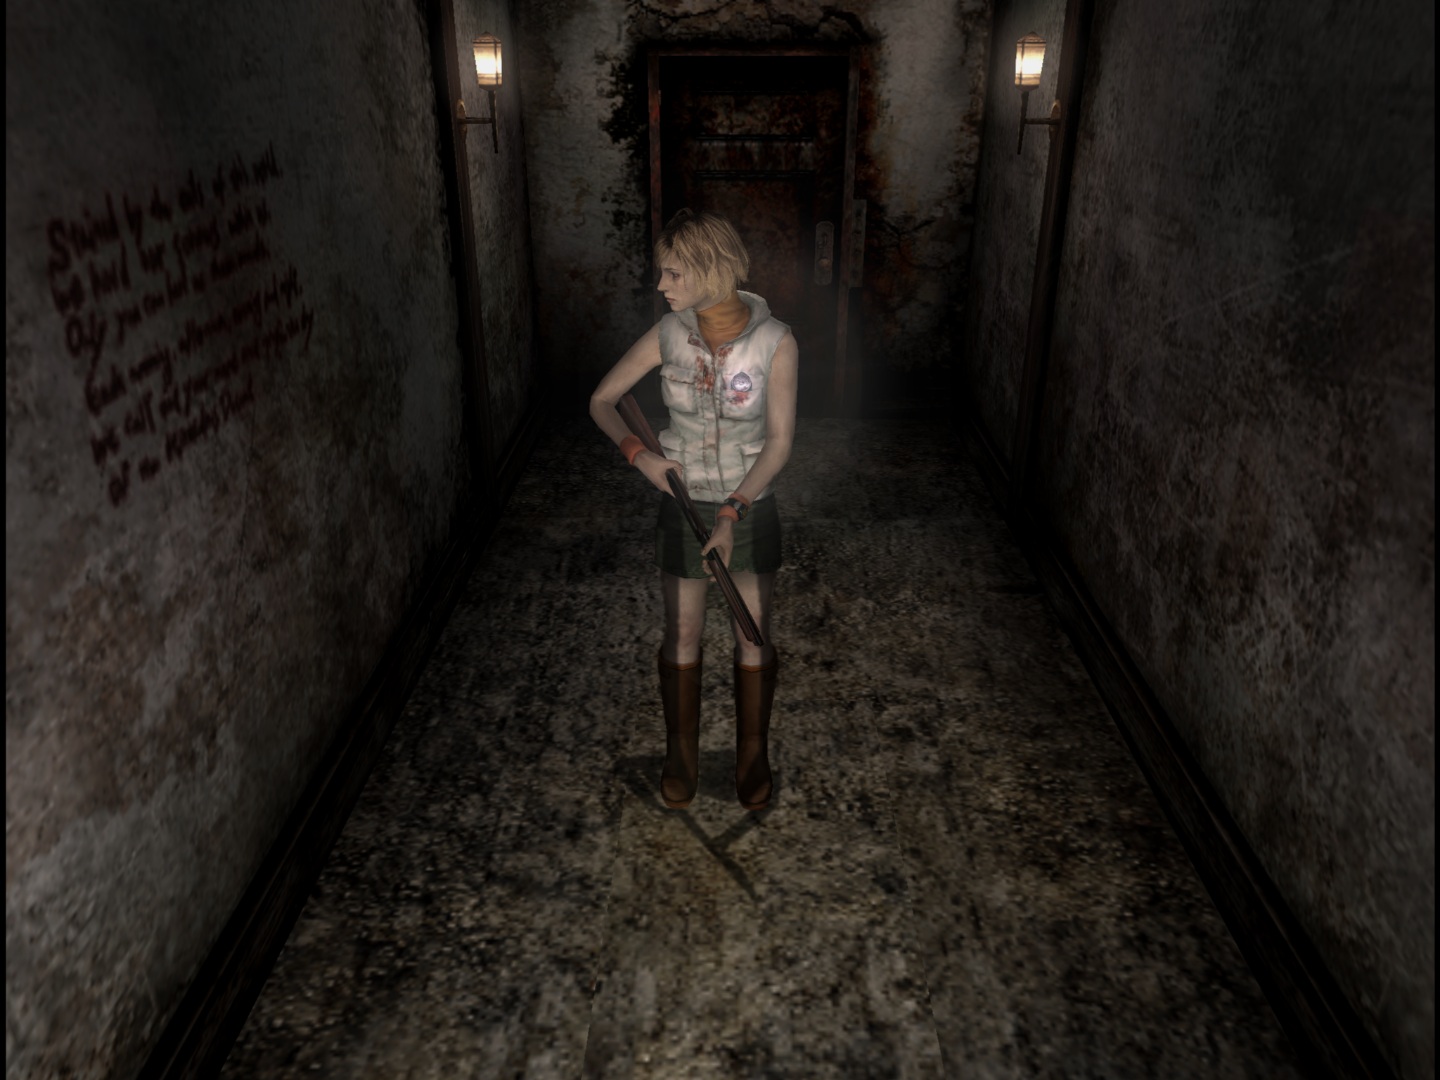 Silent Hill: The Arcade – Hardcore Gaming 101